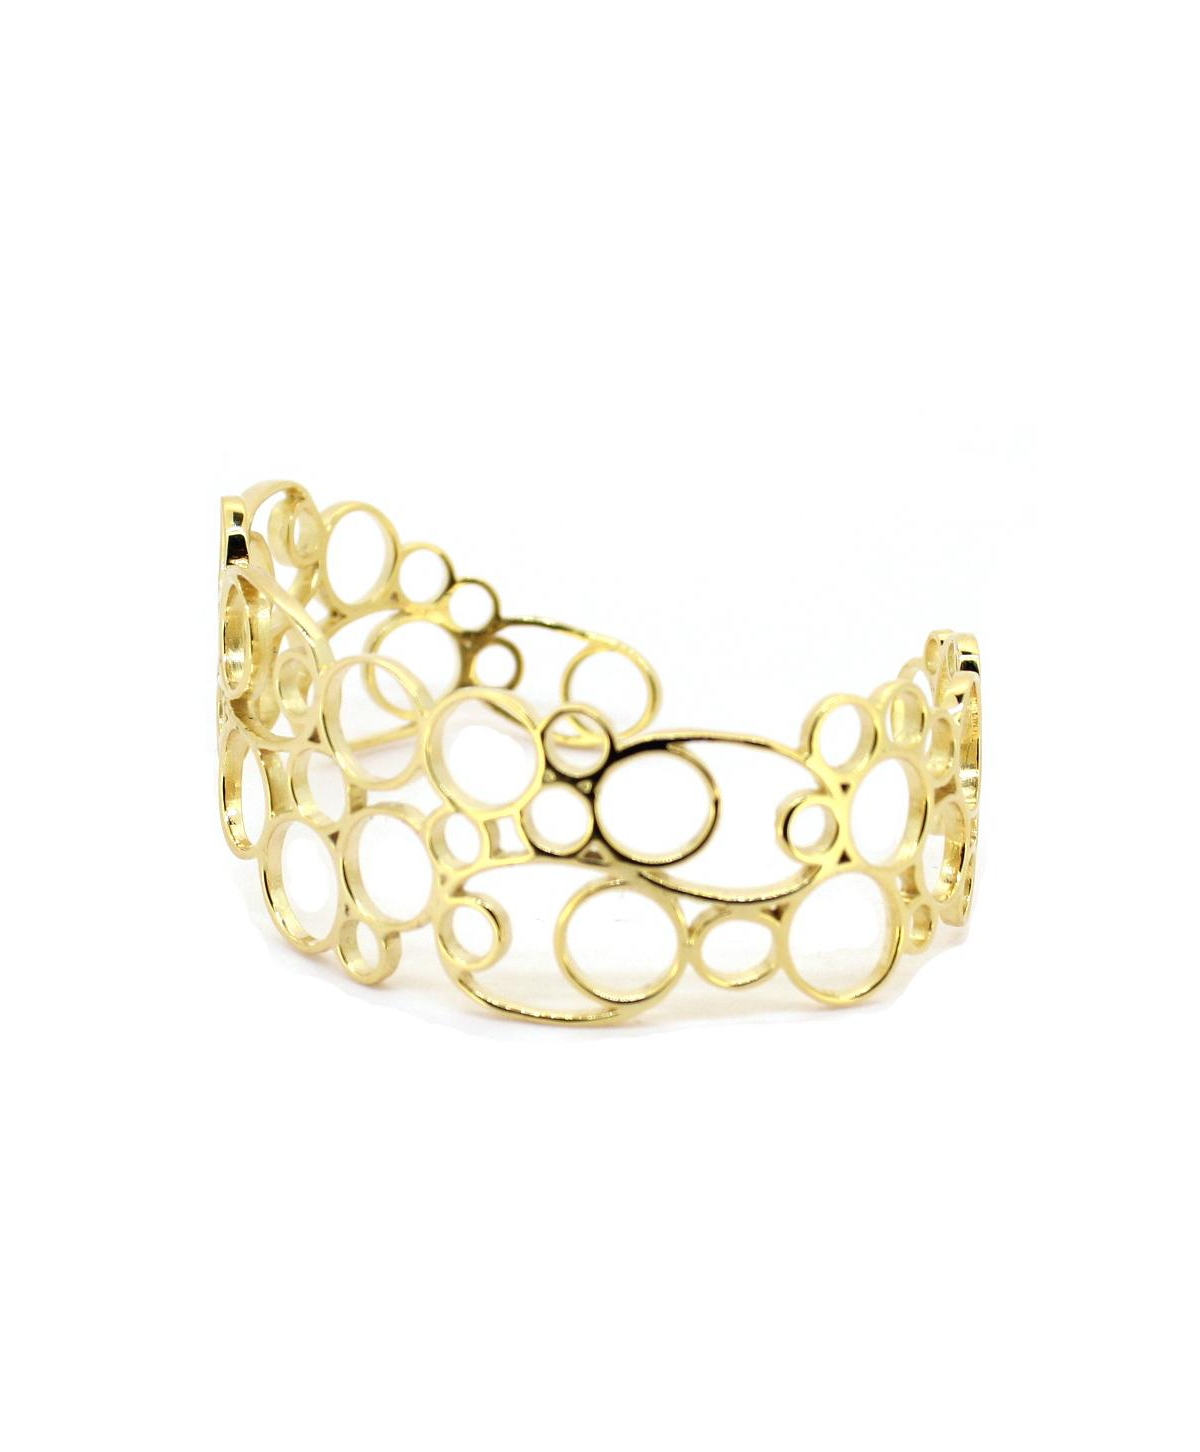 Serenity Cuff Bracelet - Gold Plated